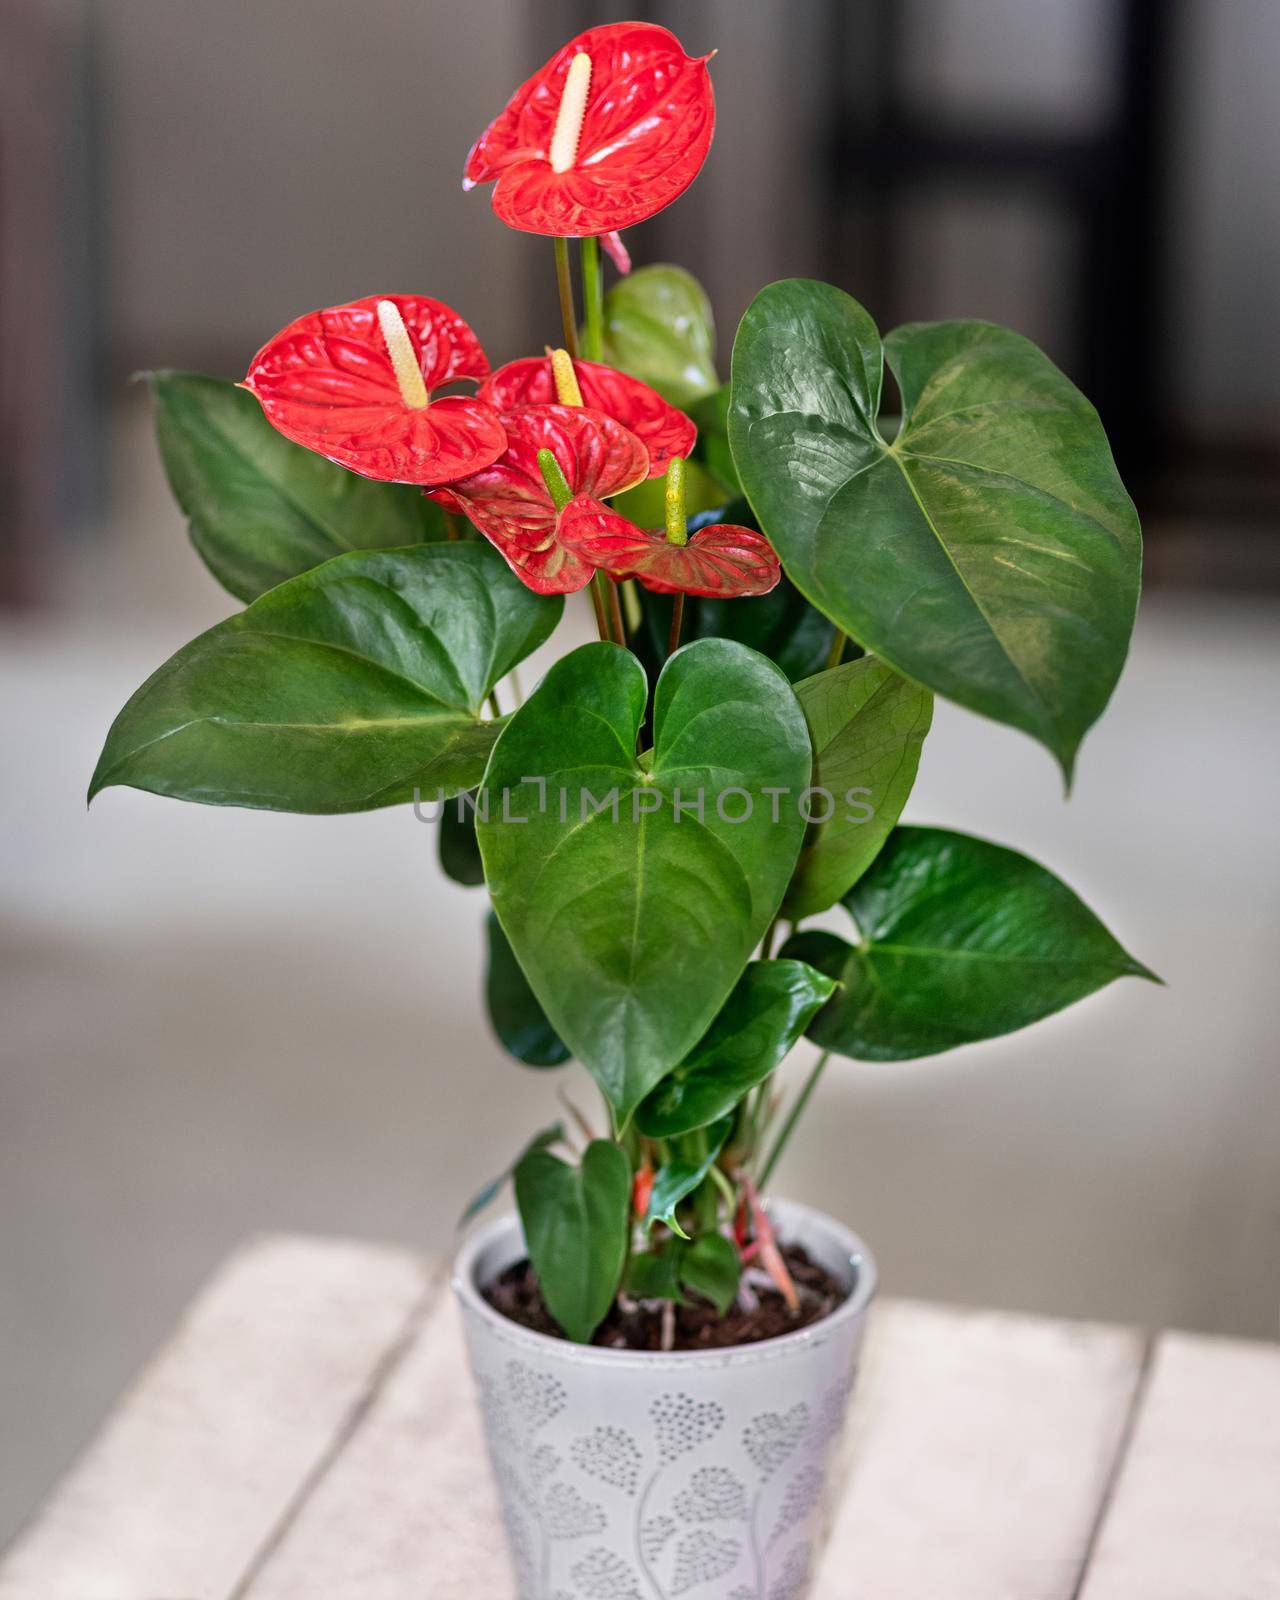 Red Anthurium Laceleaf flower plant in the pot by ferhad